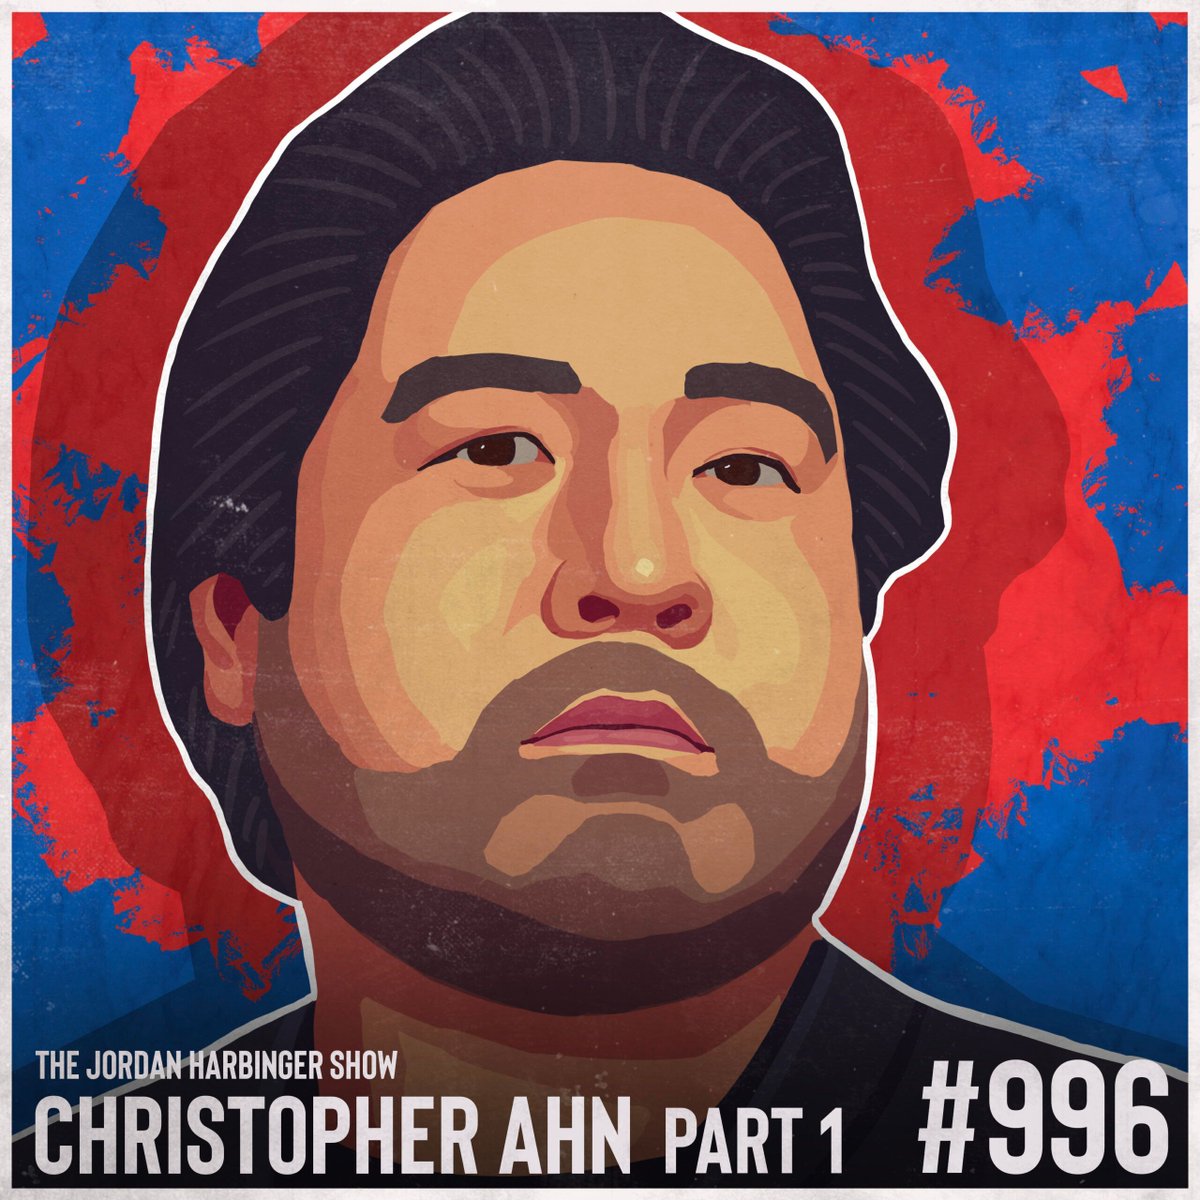 Marine veteran Christopher Ahn explains why he got involved with helping North Koreans defect to the West, and how this has put him in danger. [Pt 1/2] Notes buff.ly/3R3sauy Apple buff.ly/2RRoxcb Spotify buff.ly/3mrKq1v Overcast buff.ly/3mpWrlb